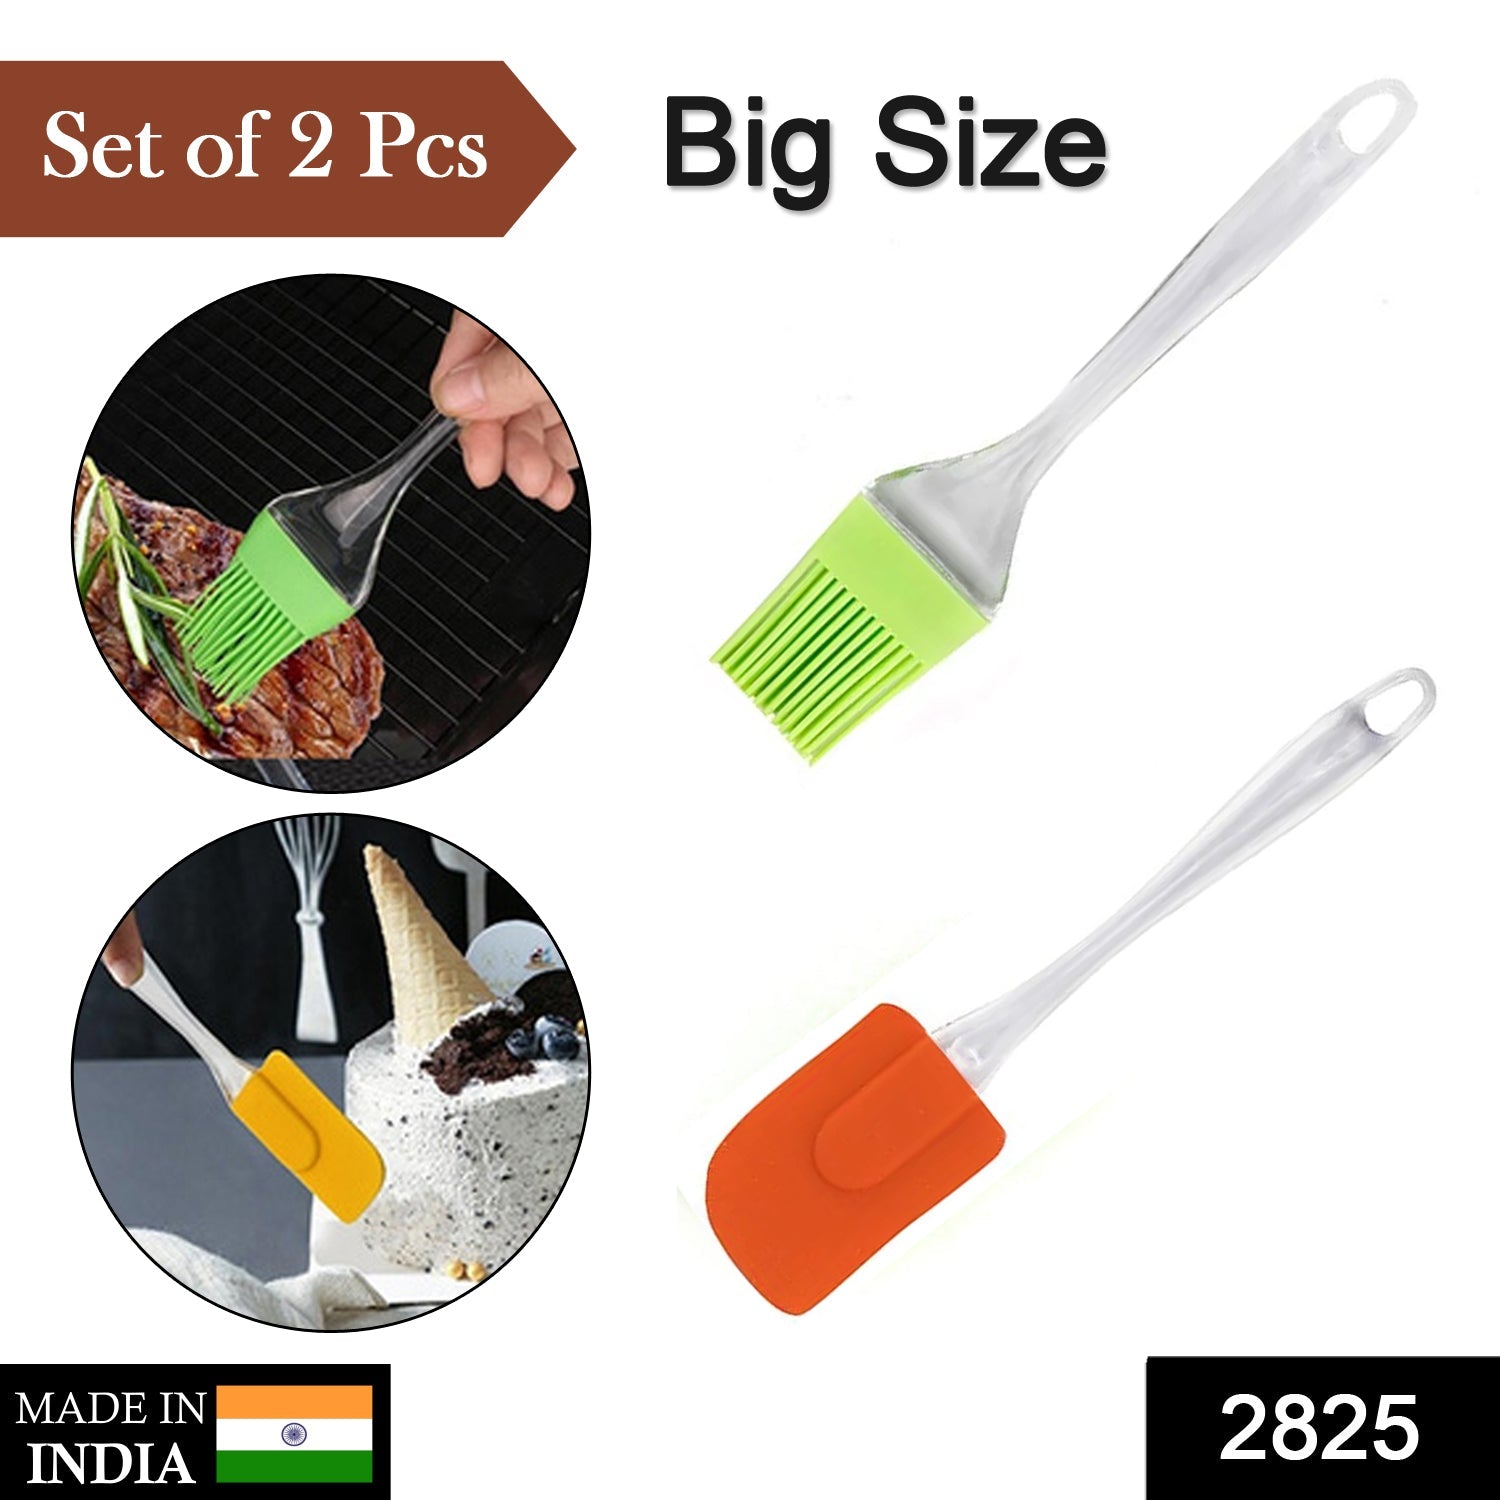 2825 2 in 1 Combo of Big Brush & Spatula Set for Pastry, Cake Mixer, Decorating, Cooking, Baking, Grilling Tandoor | Bakeware Combo | Kitchen Tool Set